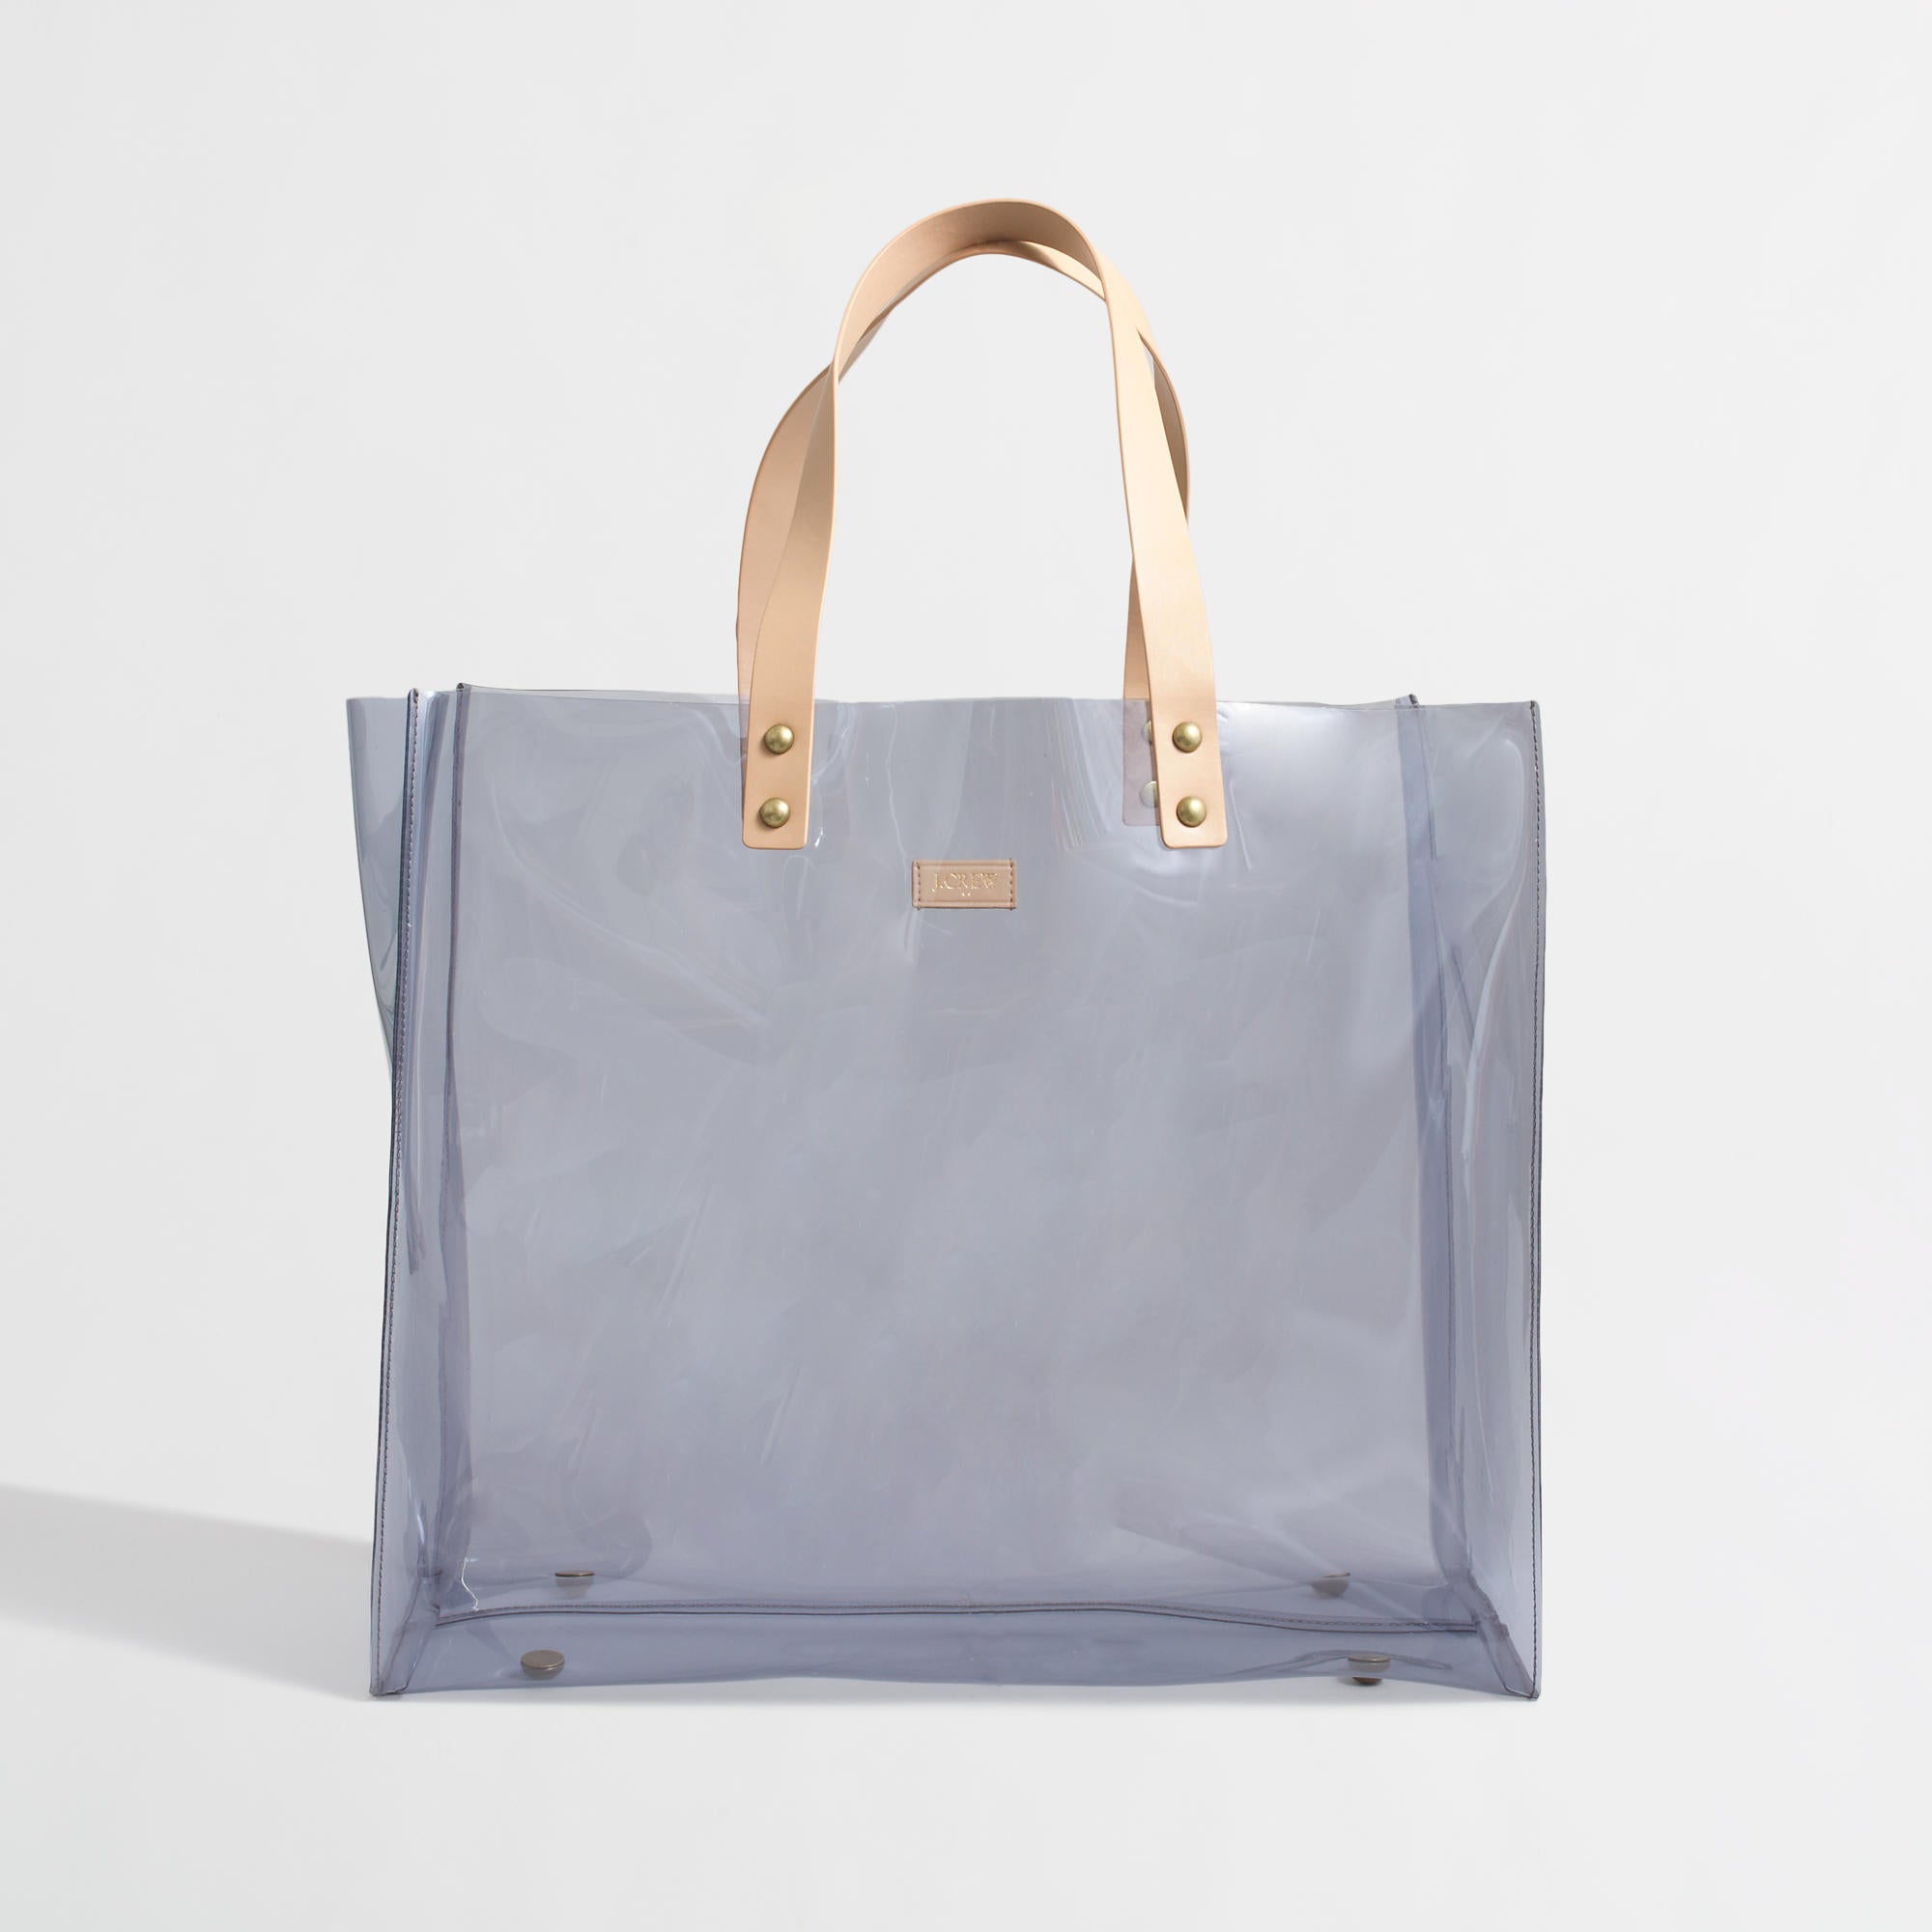 Fly From Head To Tote: 27 Hand-Picked Trendy Totes | Essence